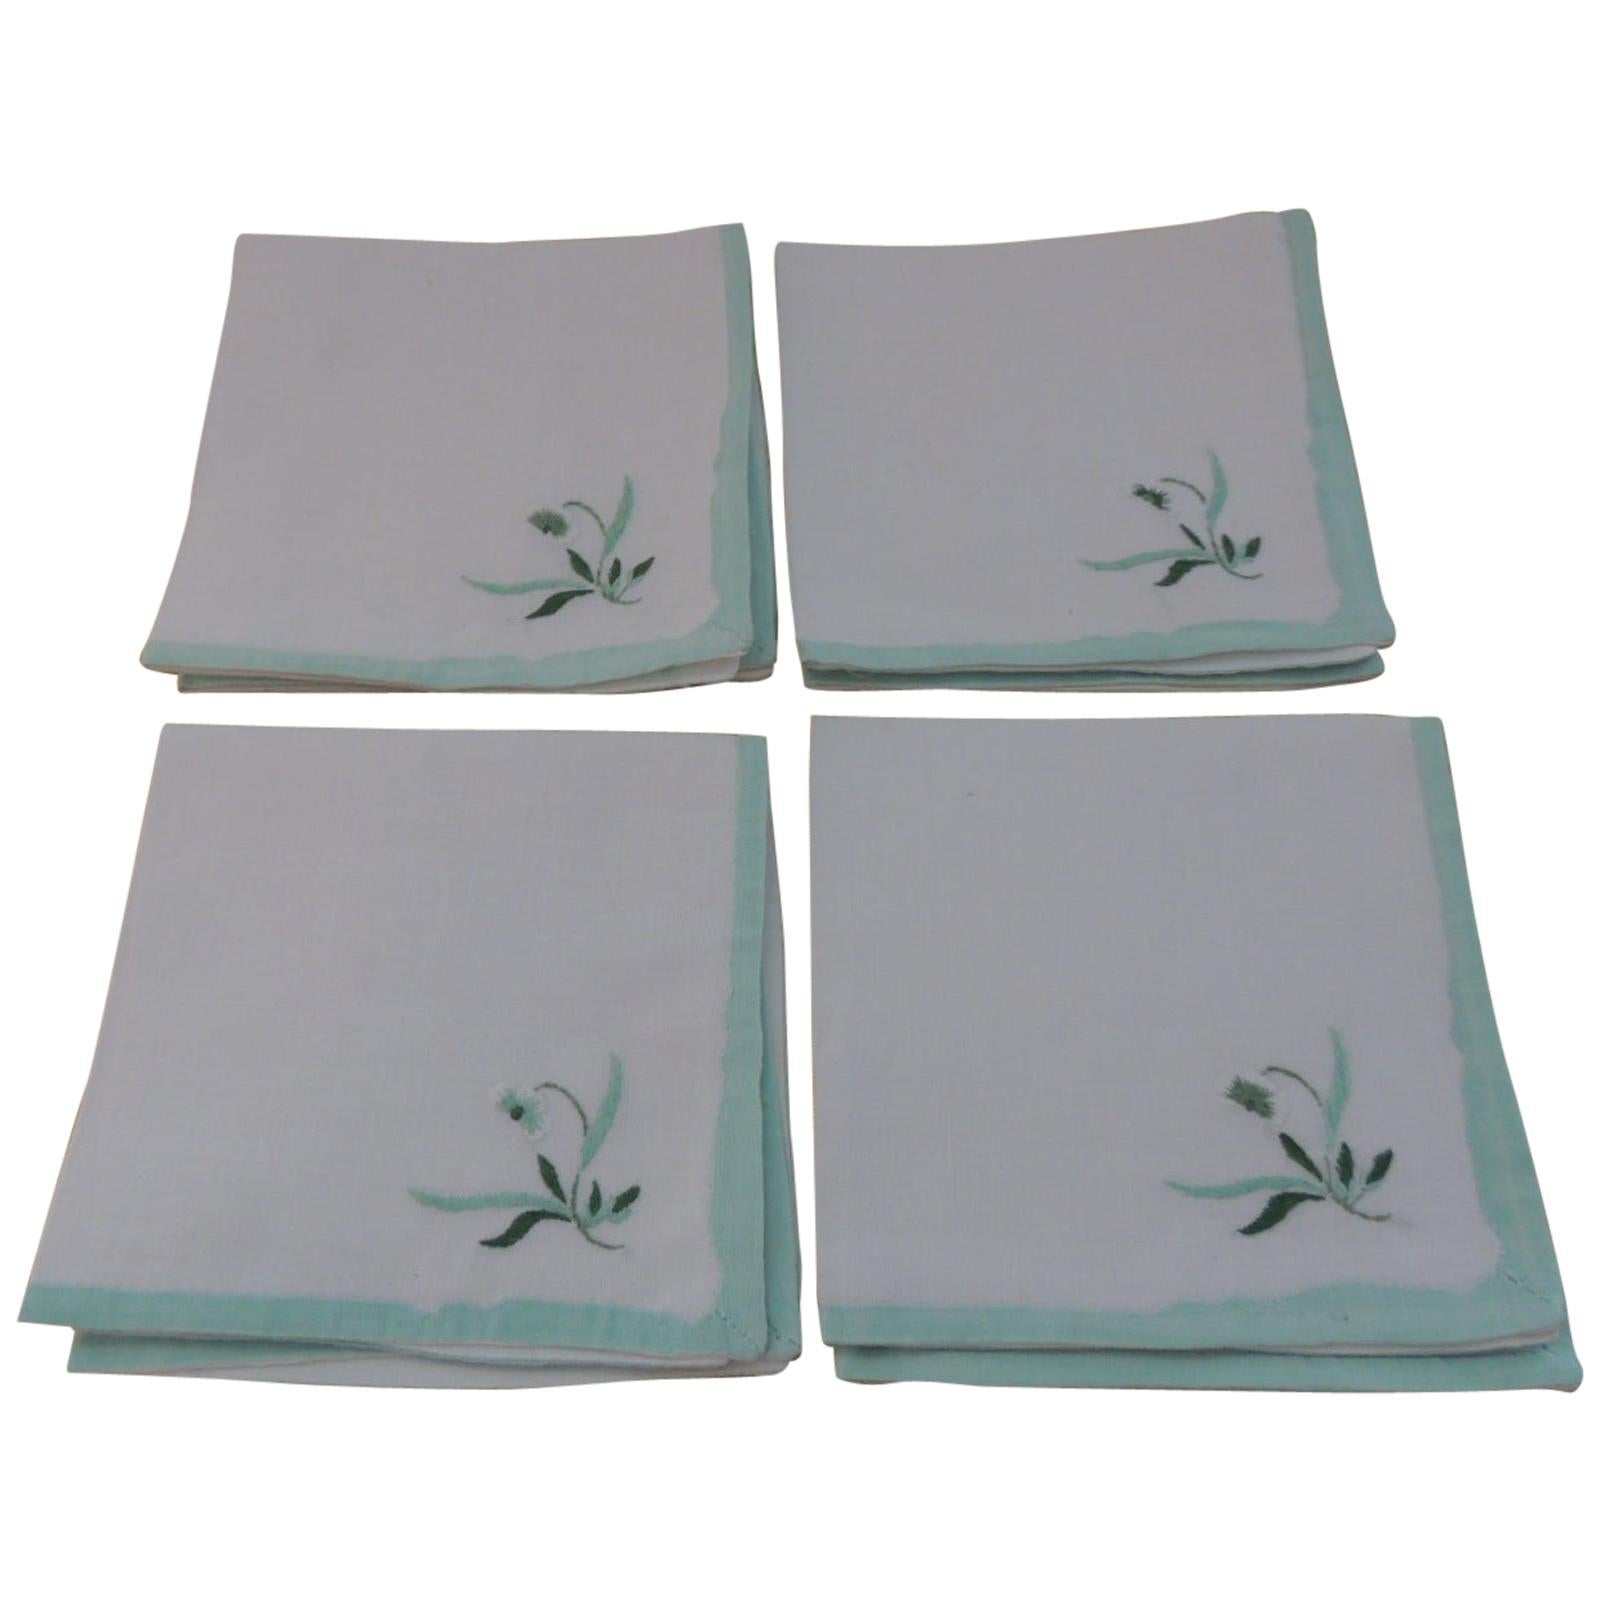 Vintage 100% Linen Embroidered Set of 4 Hand Towels in White and Green Napkins